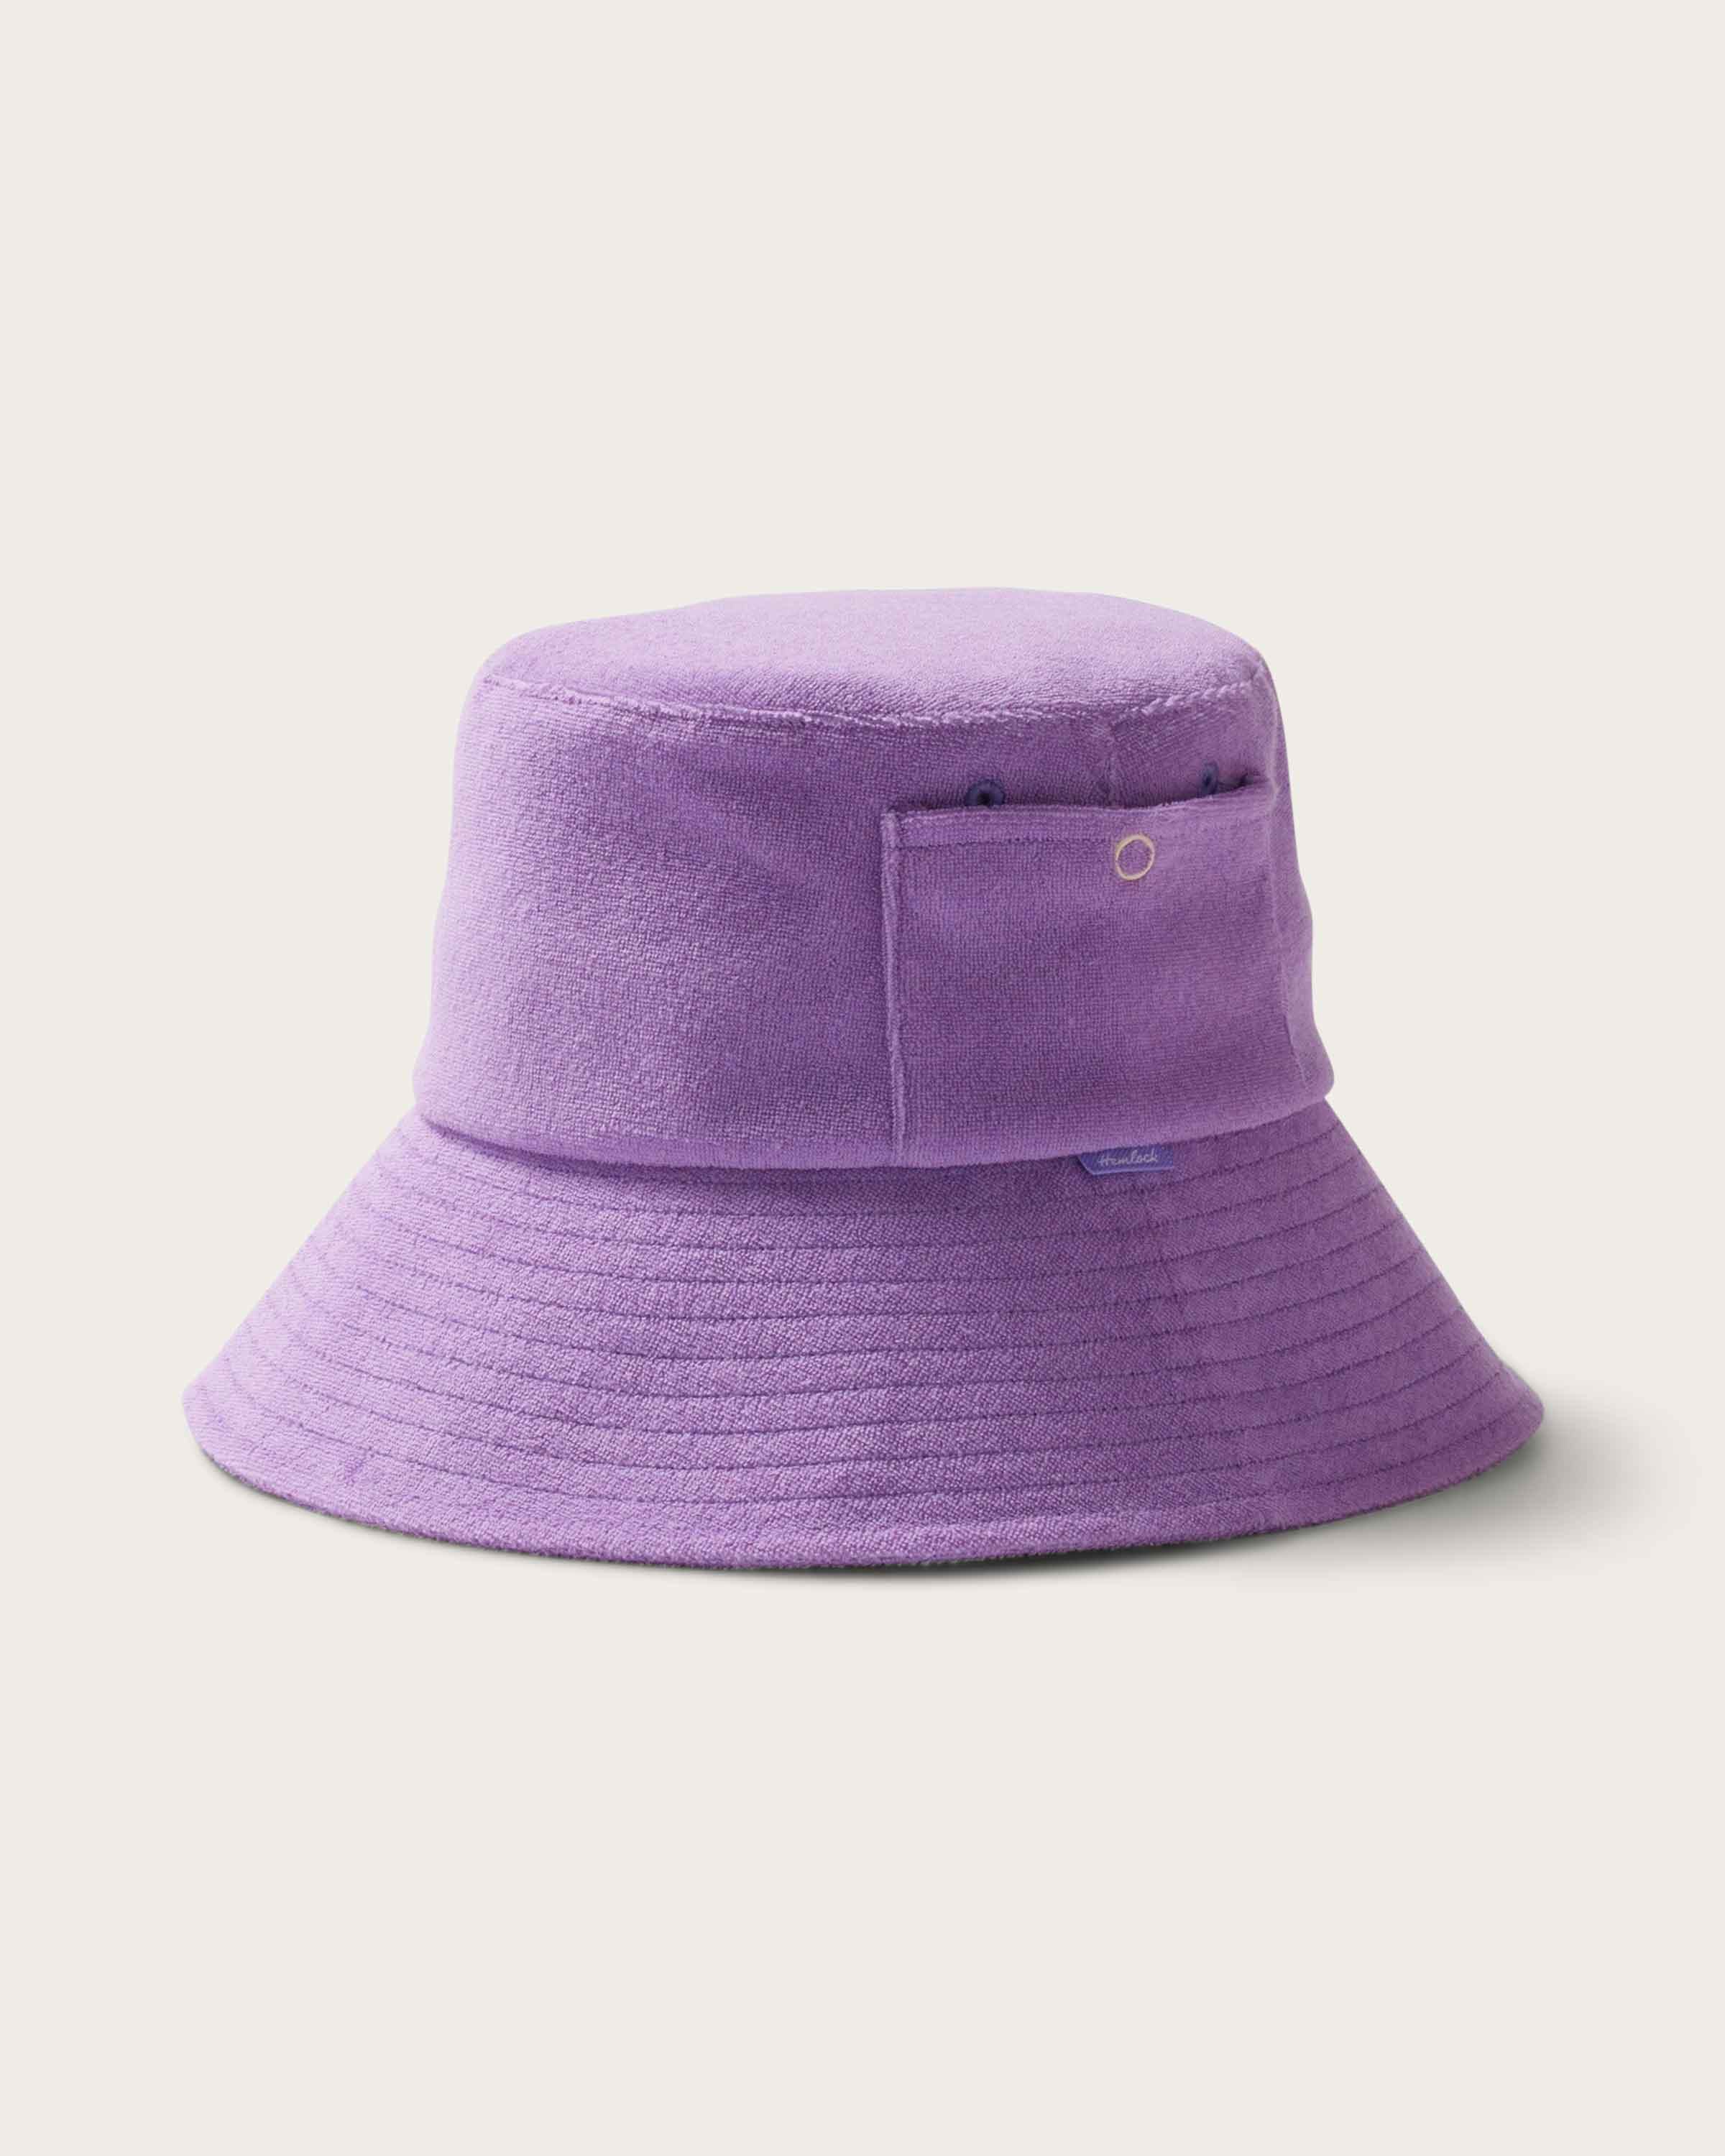 Boat Anchor Bucket Hat for Men Women Embroidered Washed Cotton Bucket Hats